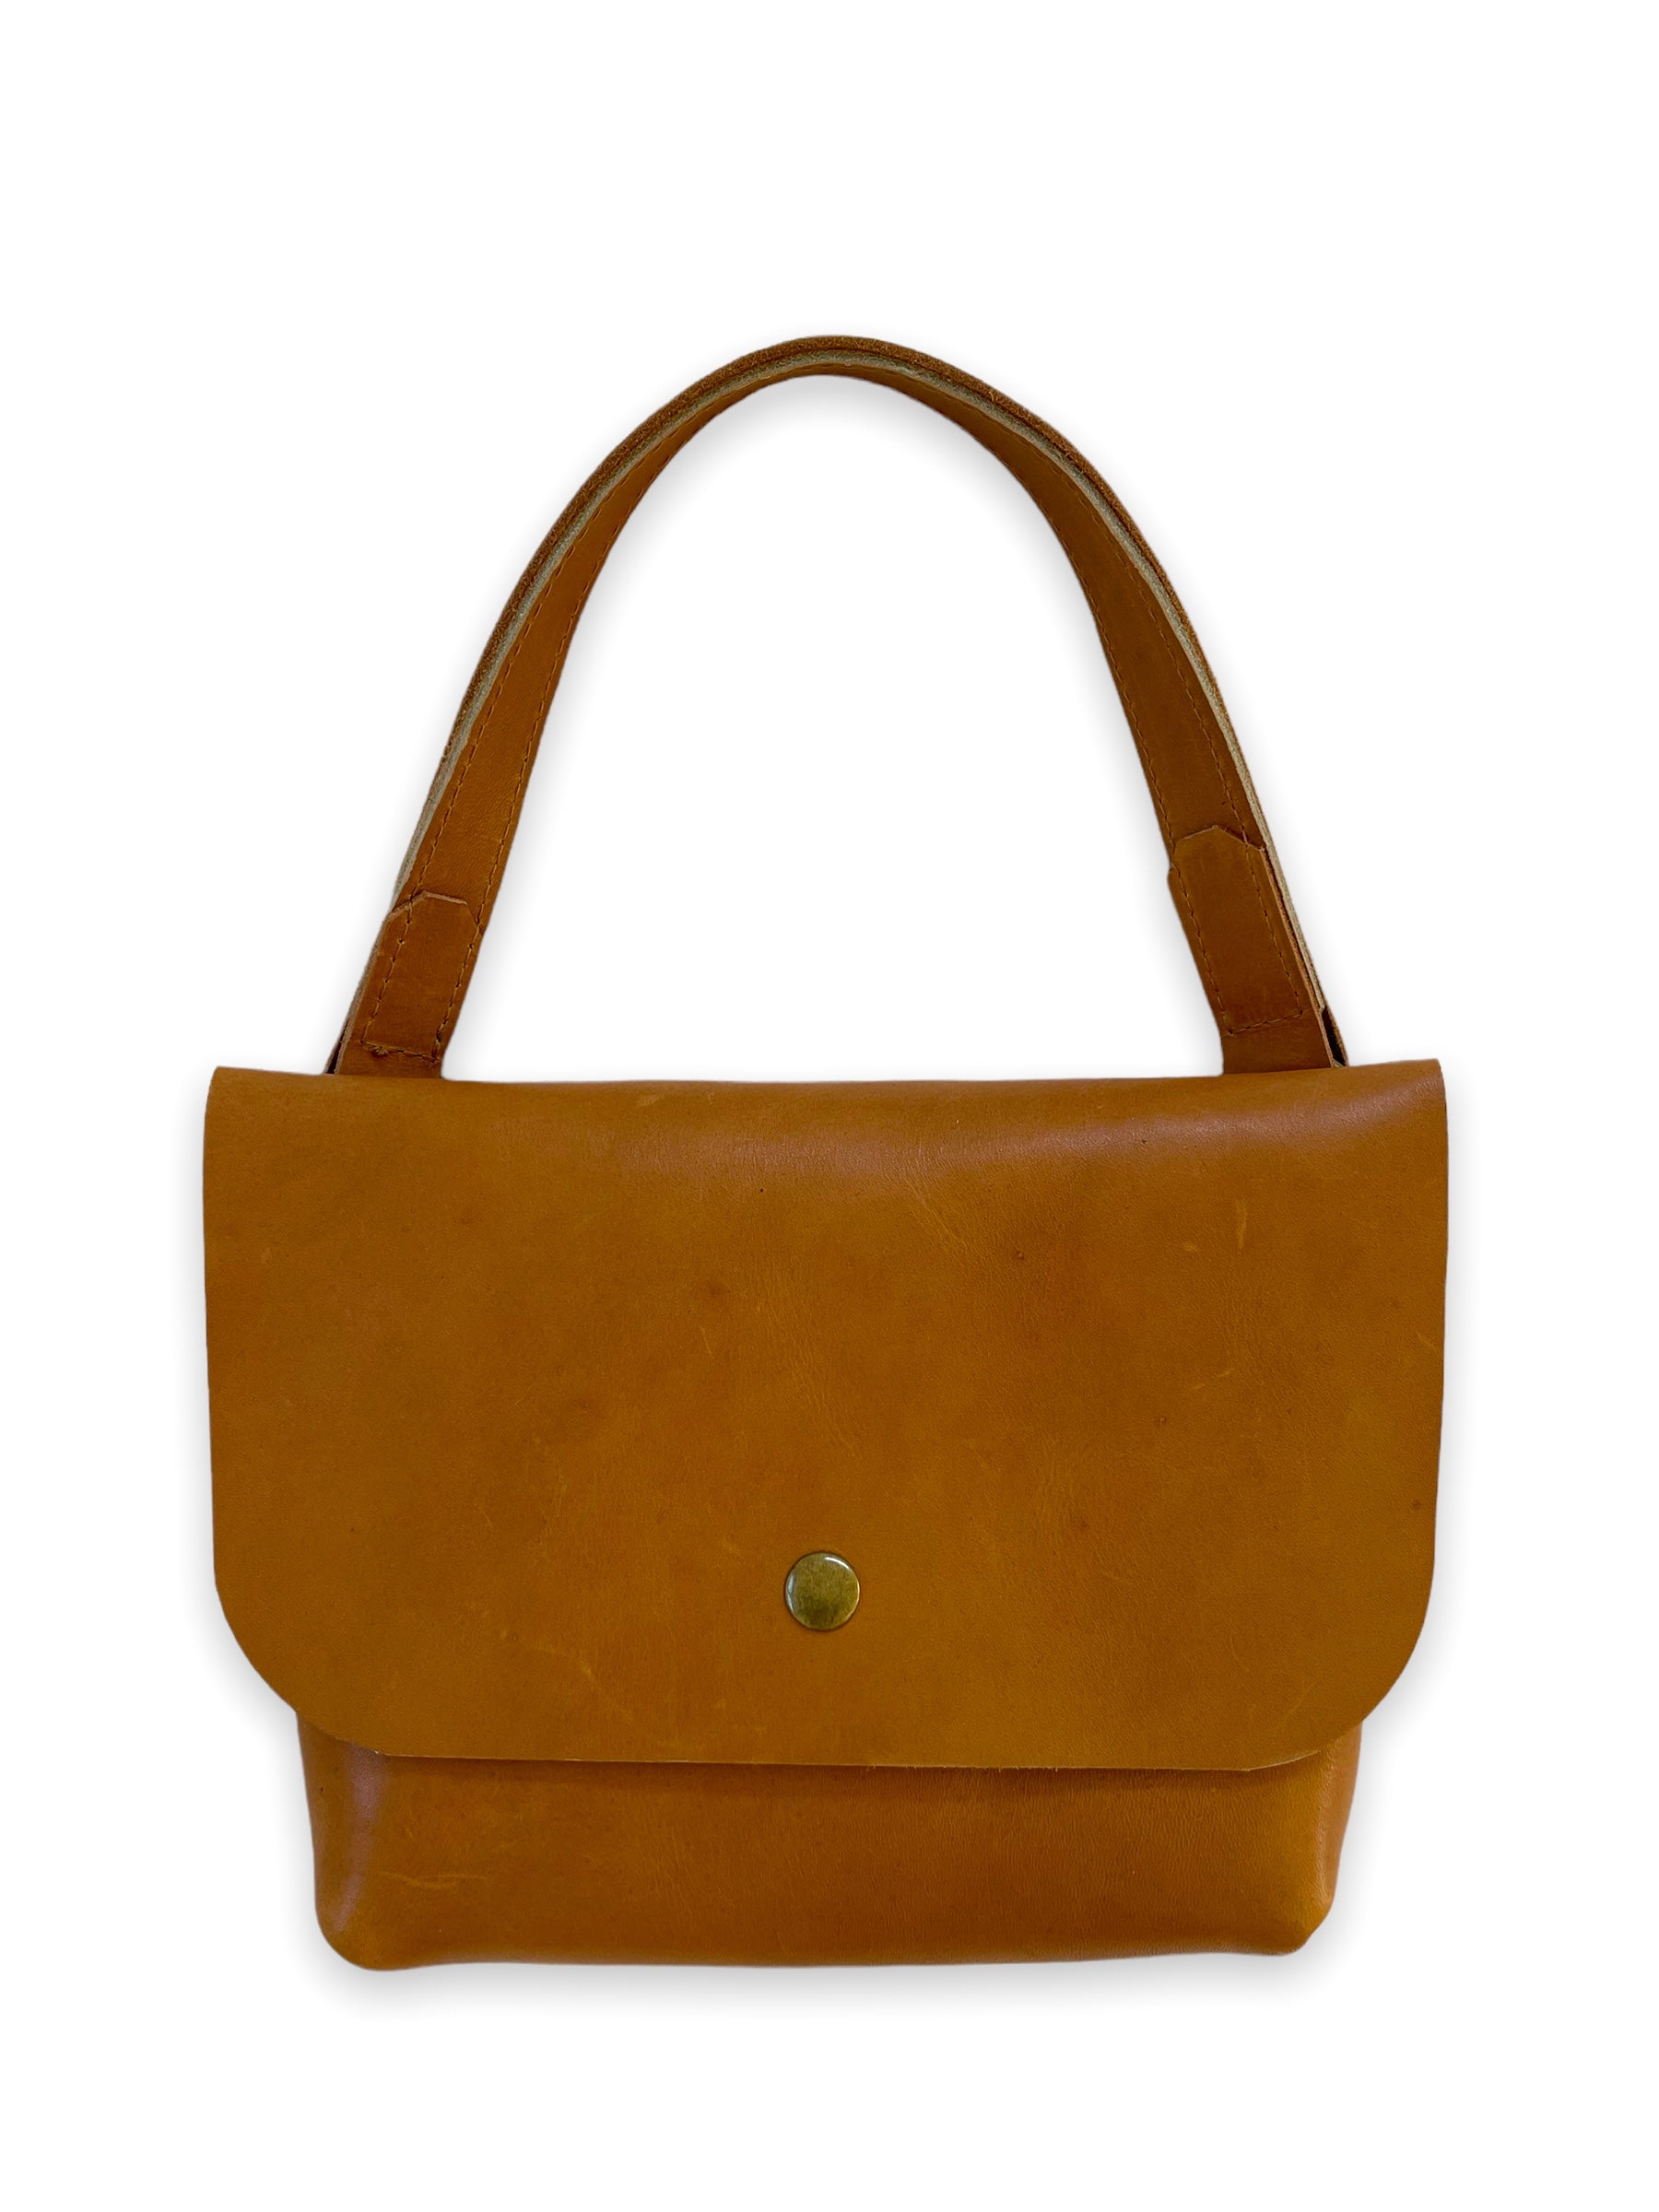 June Bag in Caramel Leather Bag - handcrafted by Market Canvas Leather in Tofino, BC, Canada